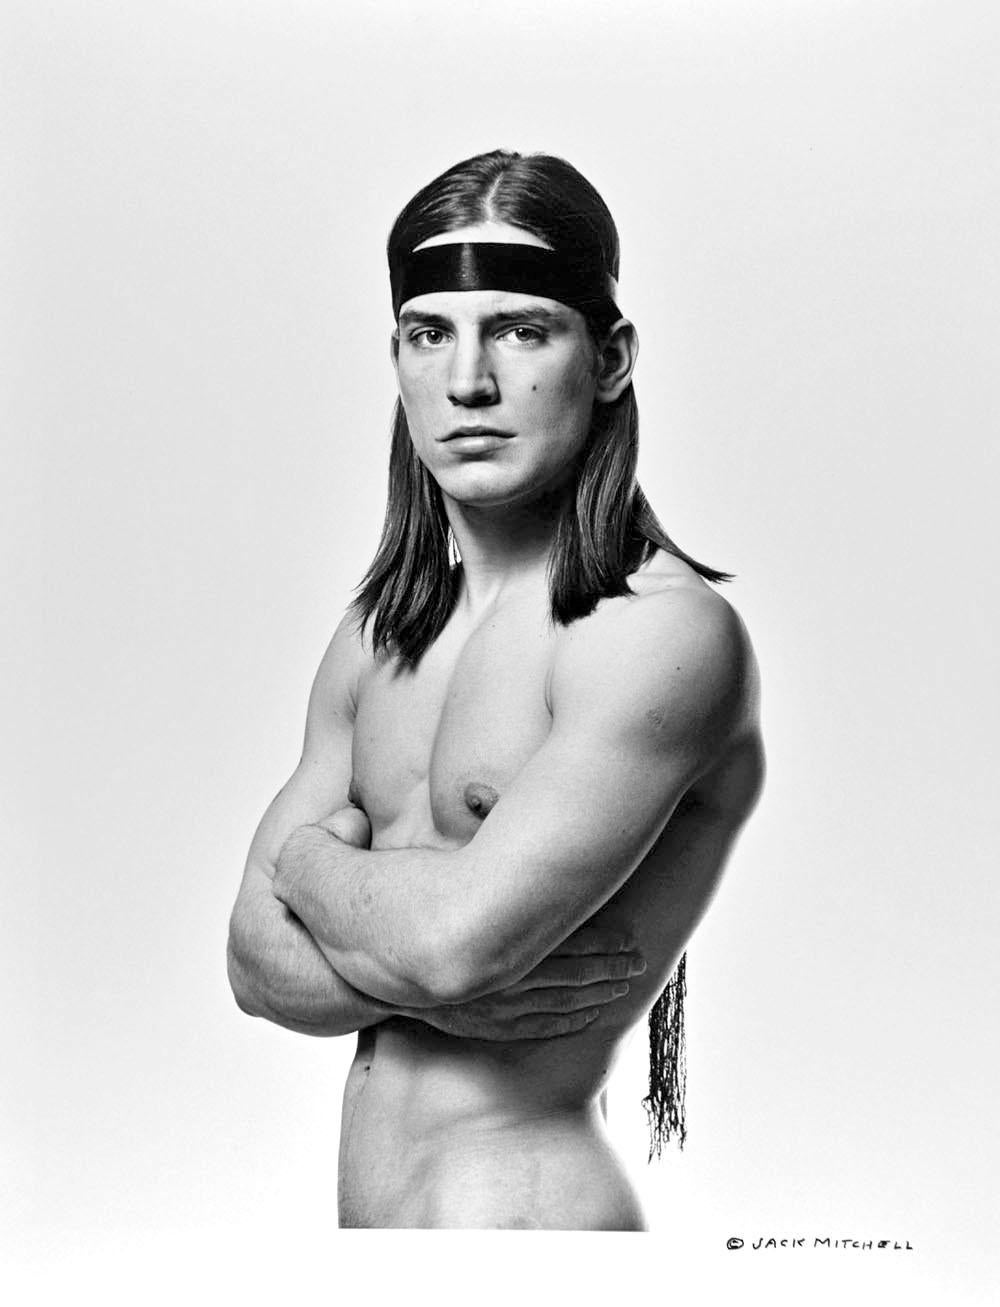 11 x 14" vintage silver gelatin photograph of Warhol Superstar Joe Dallesandro photographed in June 1970 after Joe starring in Andy Warhol's "Trash". Inscribed by Jack Mitchell on the verso.  Comes directly from the Jack Mitchell Archives with a